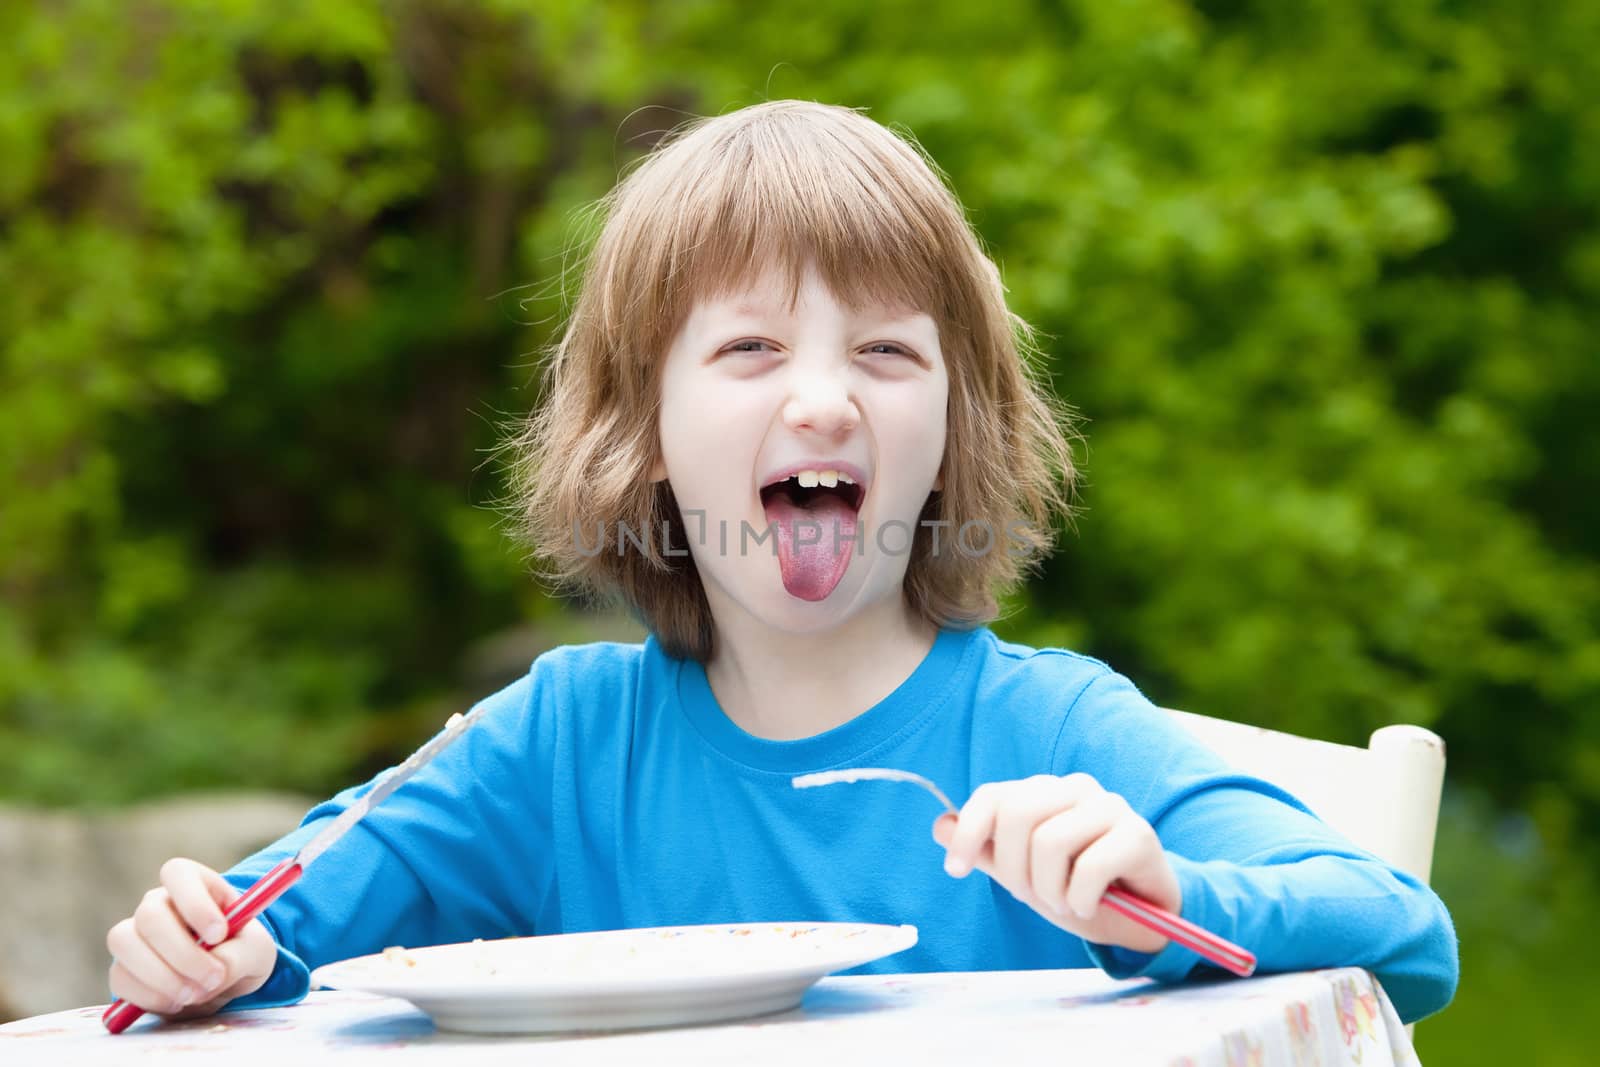 Blond Boy Eating Sticking out his Tongue by courtyardpix